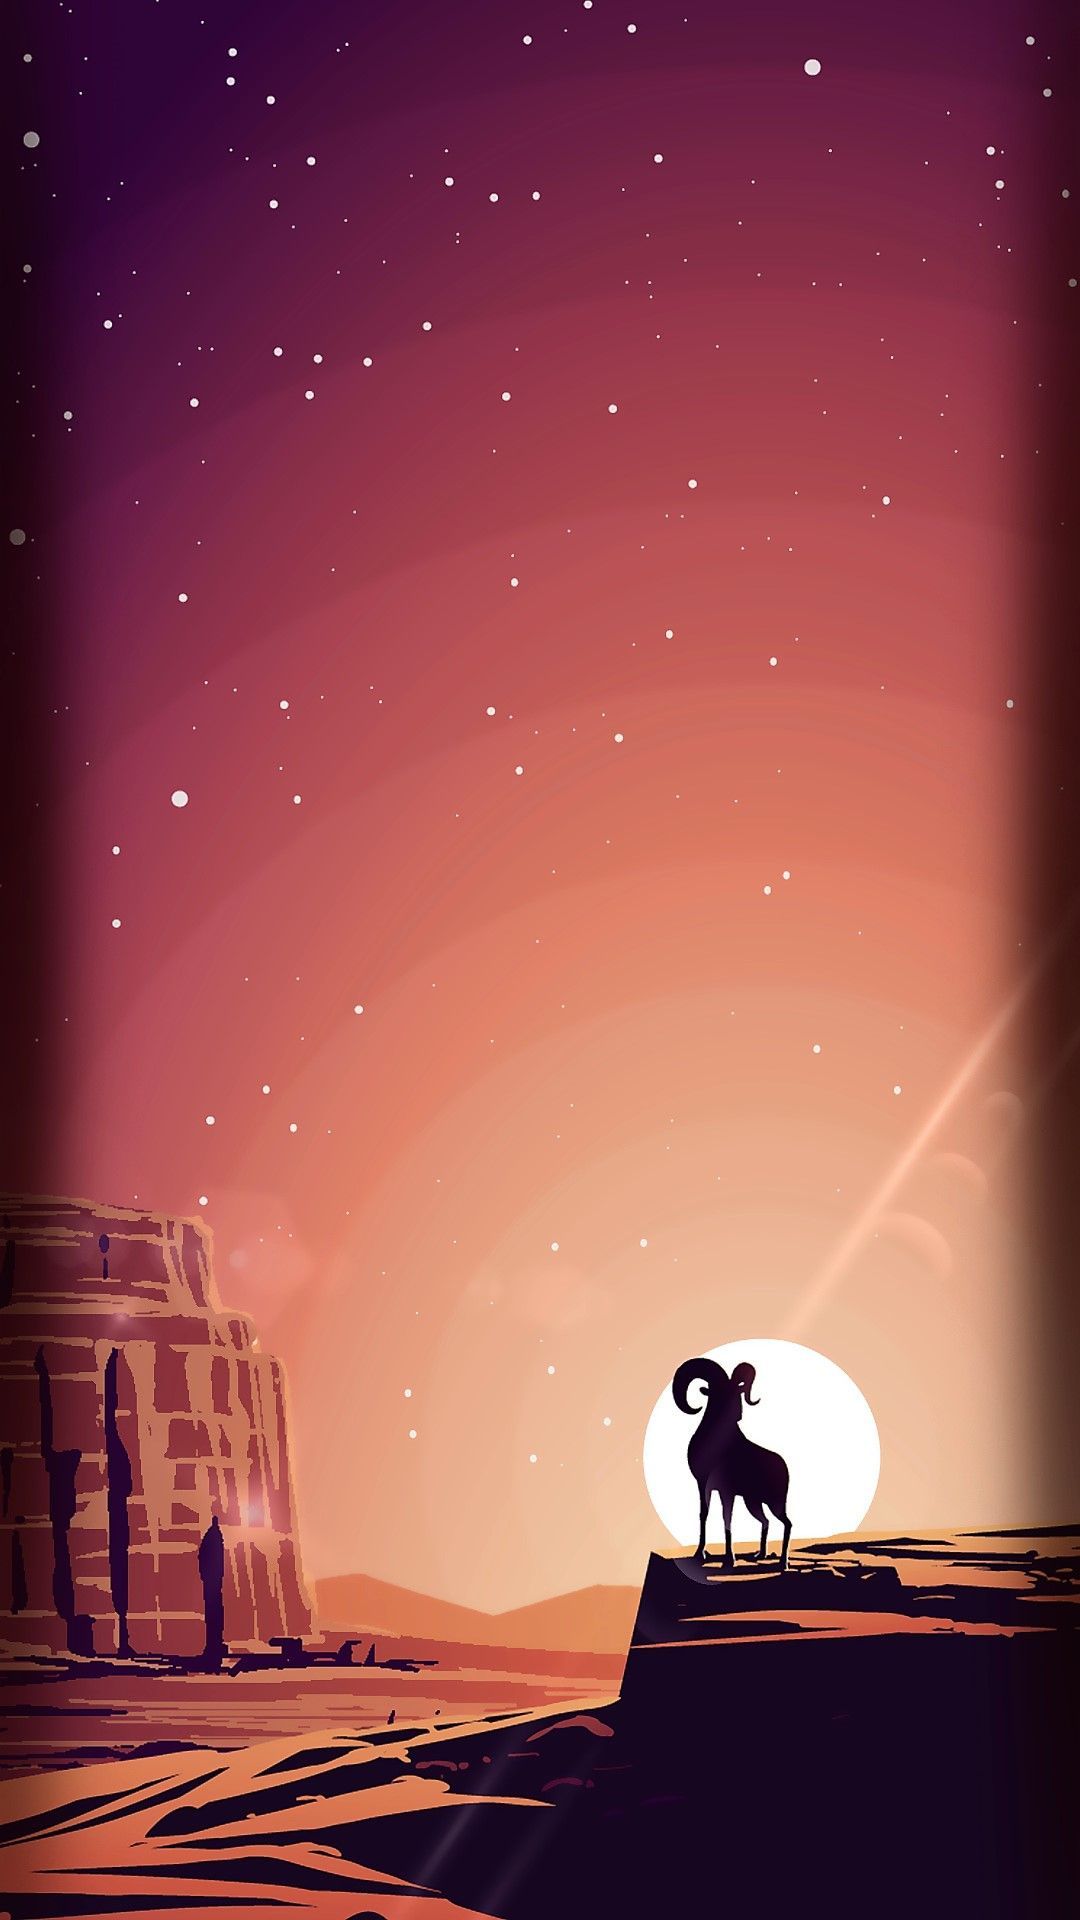 Sunset Vector to see more cute cartoon wallpaper! - Cartoon wallpaper, Wallpaper, Phone wallpaper